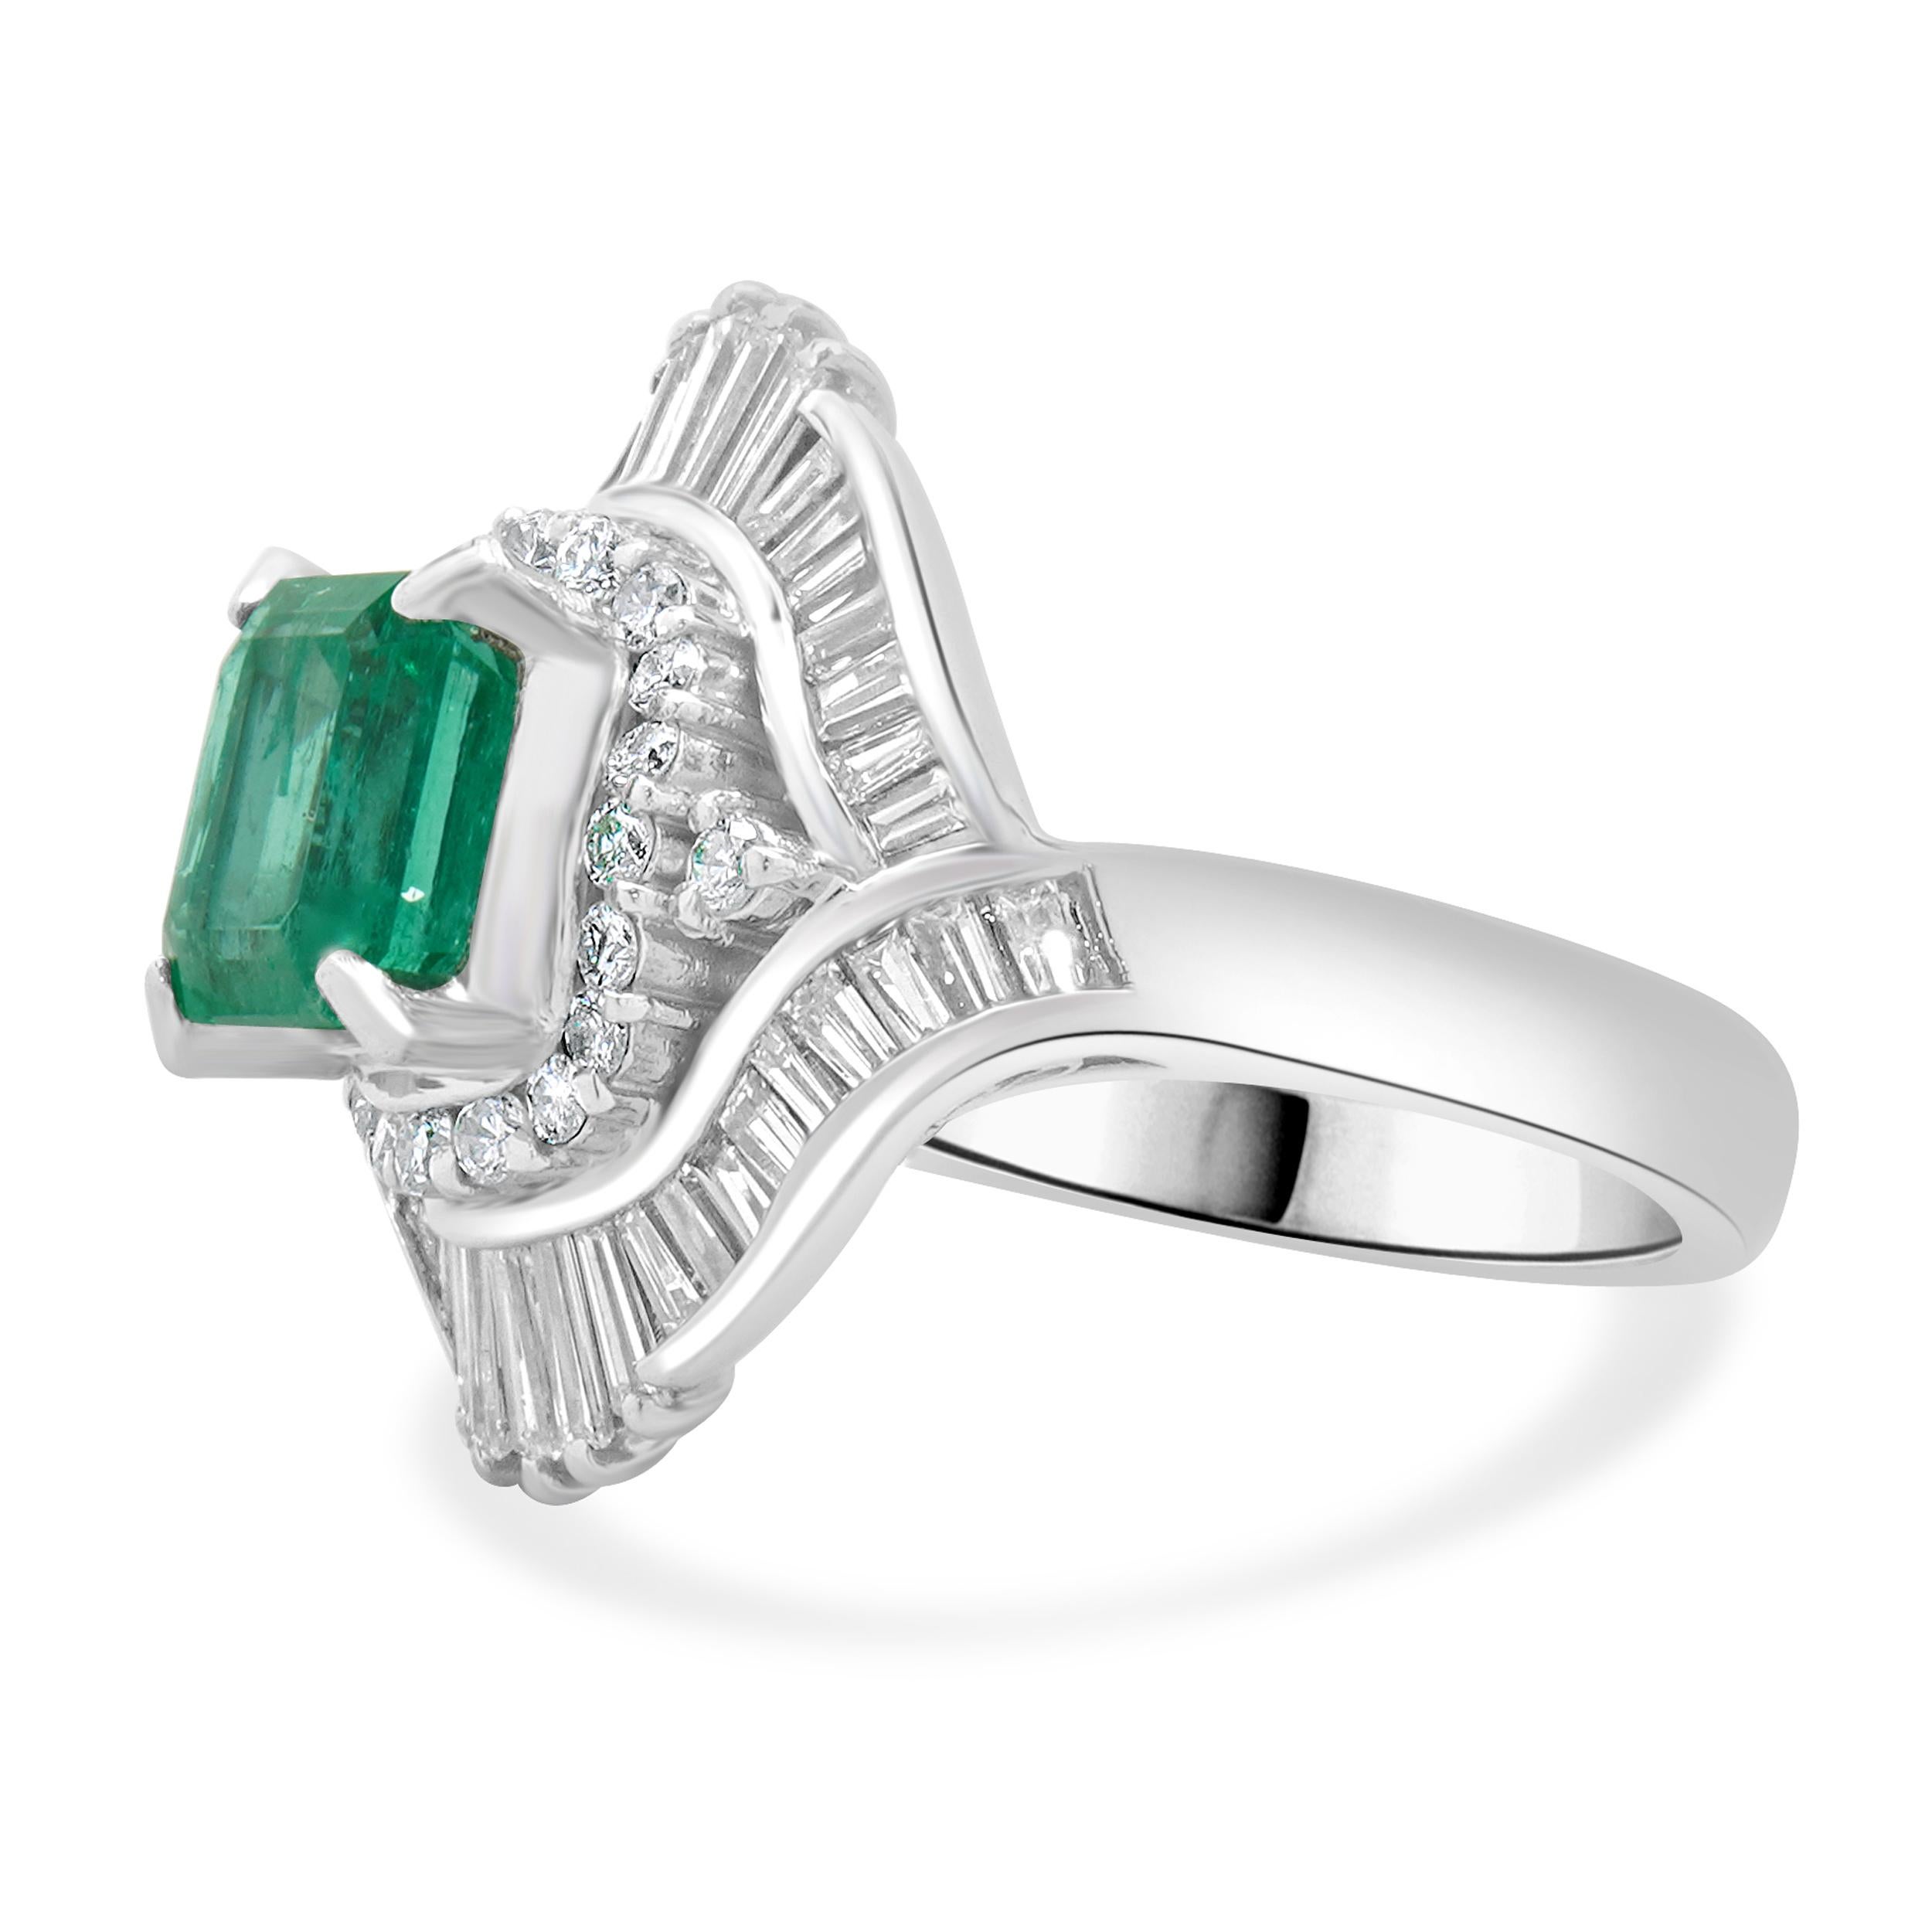 Material: platinum
Diamond: 22 round brilliant & 42 baguettes = 1.15cttw
Color: G/H
Clarity: SI1
Emerald: 1 emerald cut = 1.77ct
IGS: D 26735
Ring Size: 6.5 (please allow up to 2 additional business days for sizing requests)
Dimensions: ring top